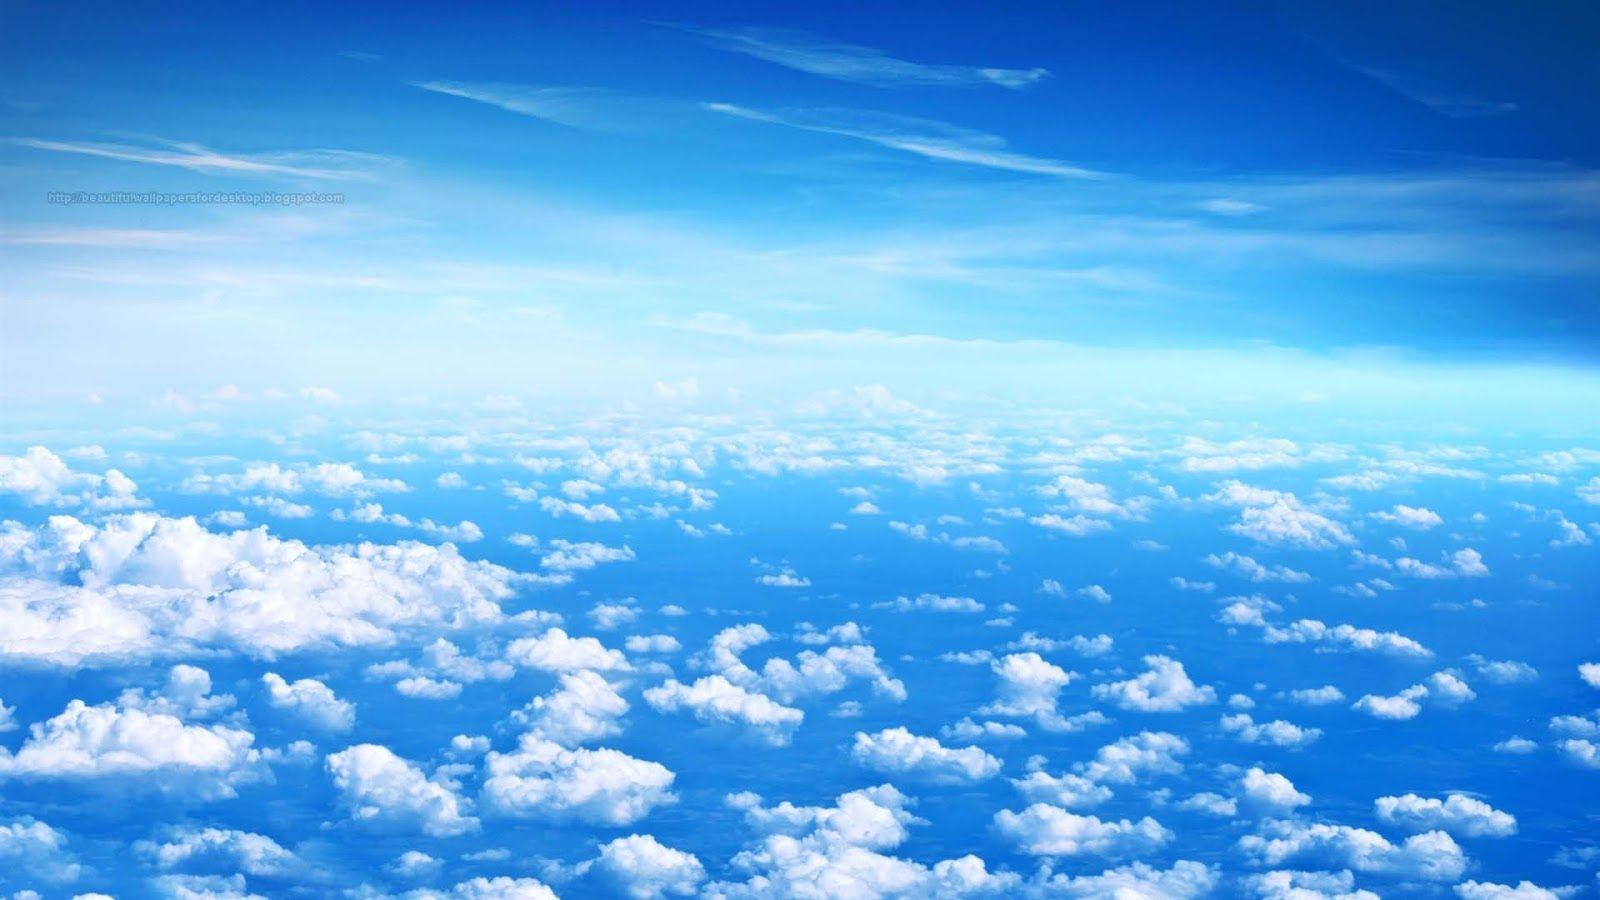 Clouds Hd Wallpapers